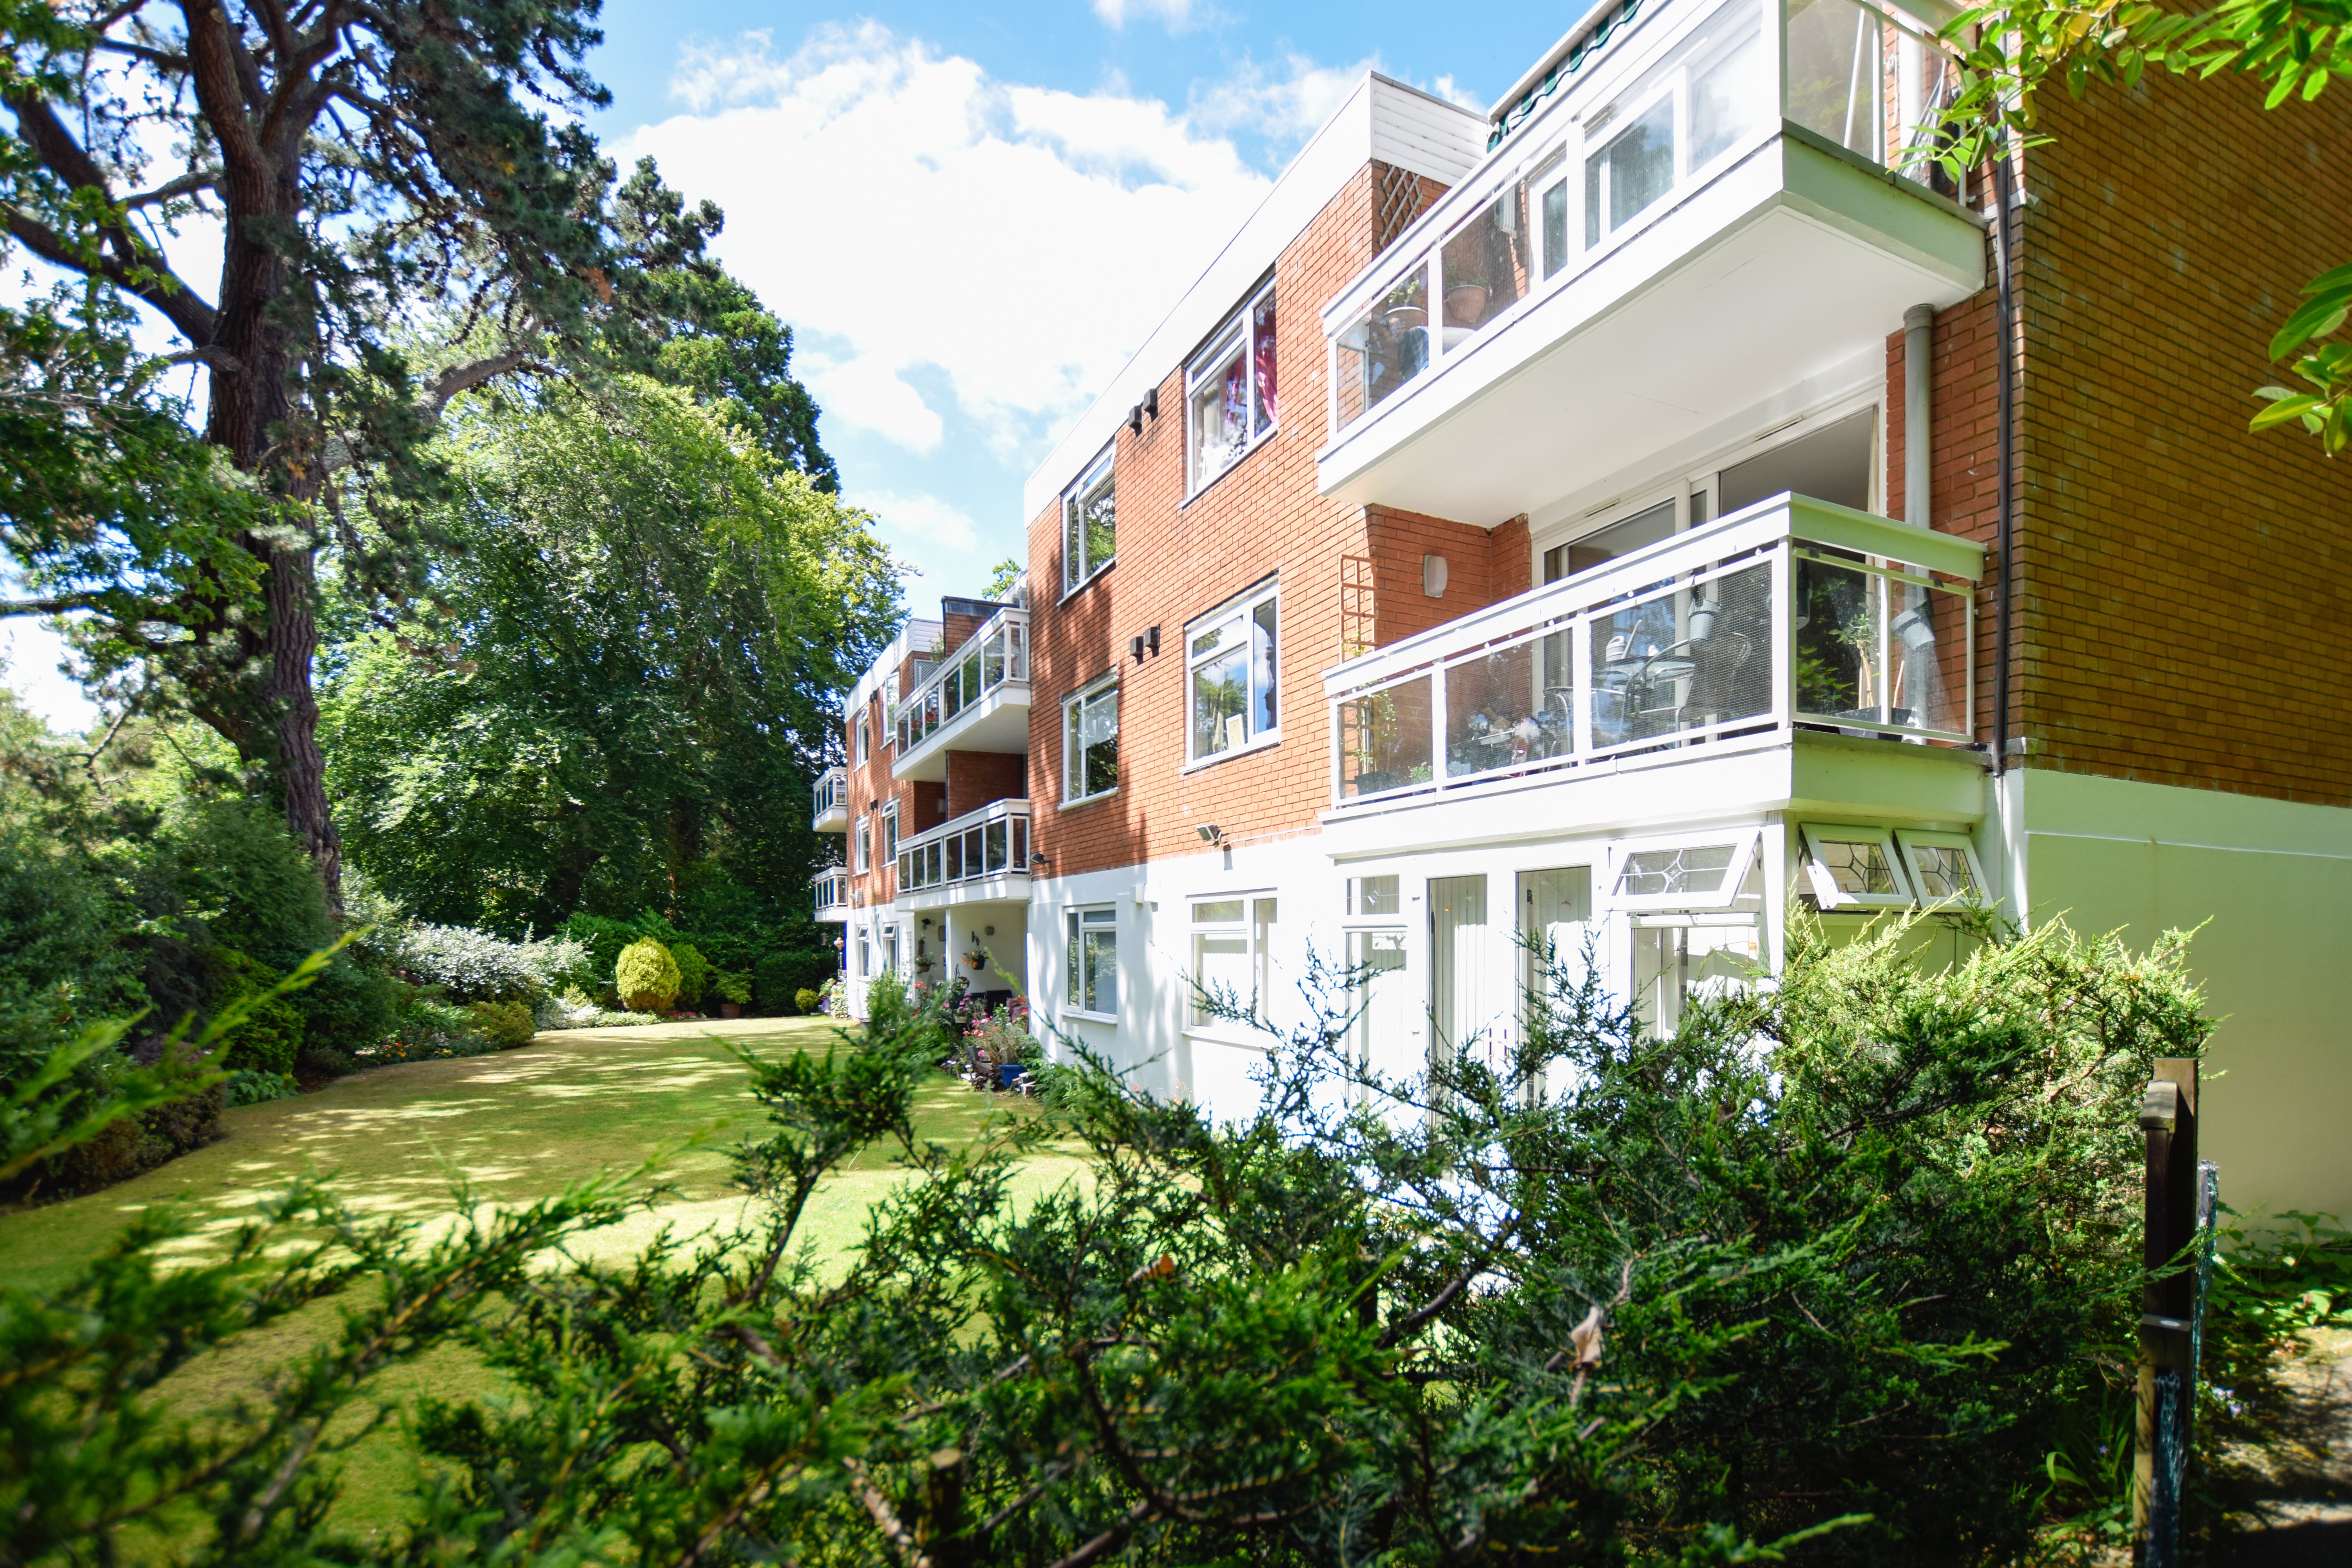 Christopher Shaw Residential is pleased to offer this well kept two bedroom apartment in Talbot Woods on Branksome Wood Road. The property is situated on the 1st floor of a well maintained block, and comes with secure parking.